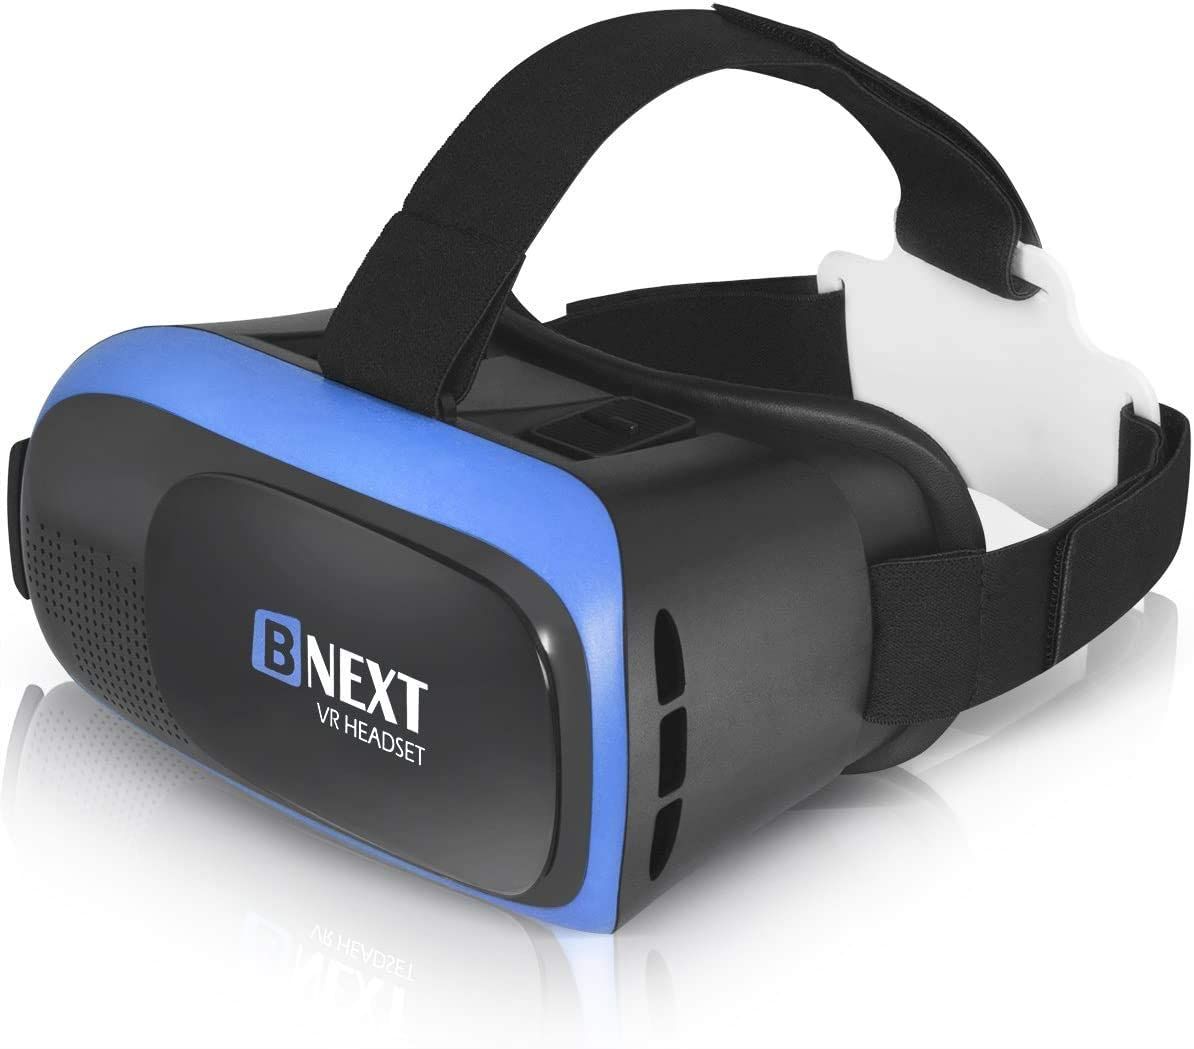 BNEXT - Best VR Headset For iPhone 13